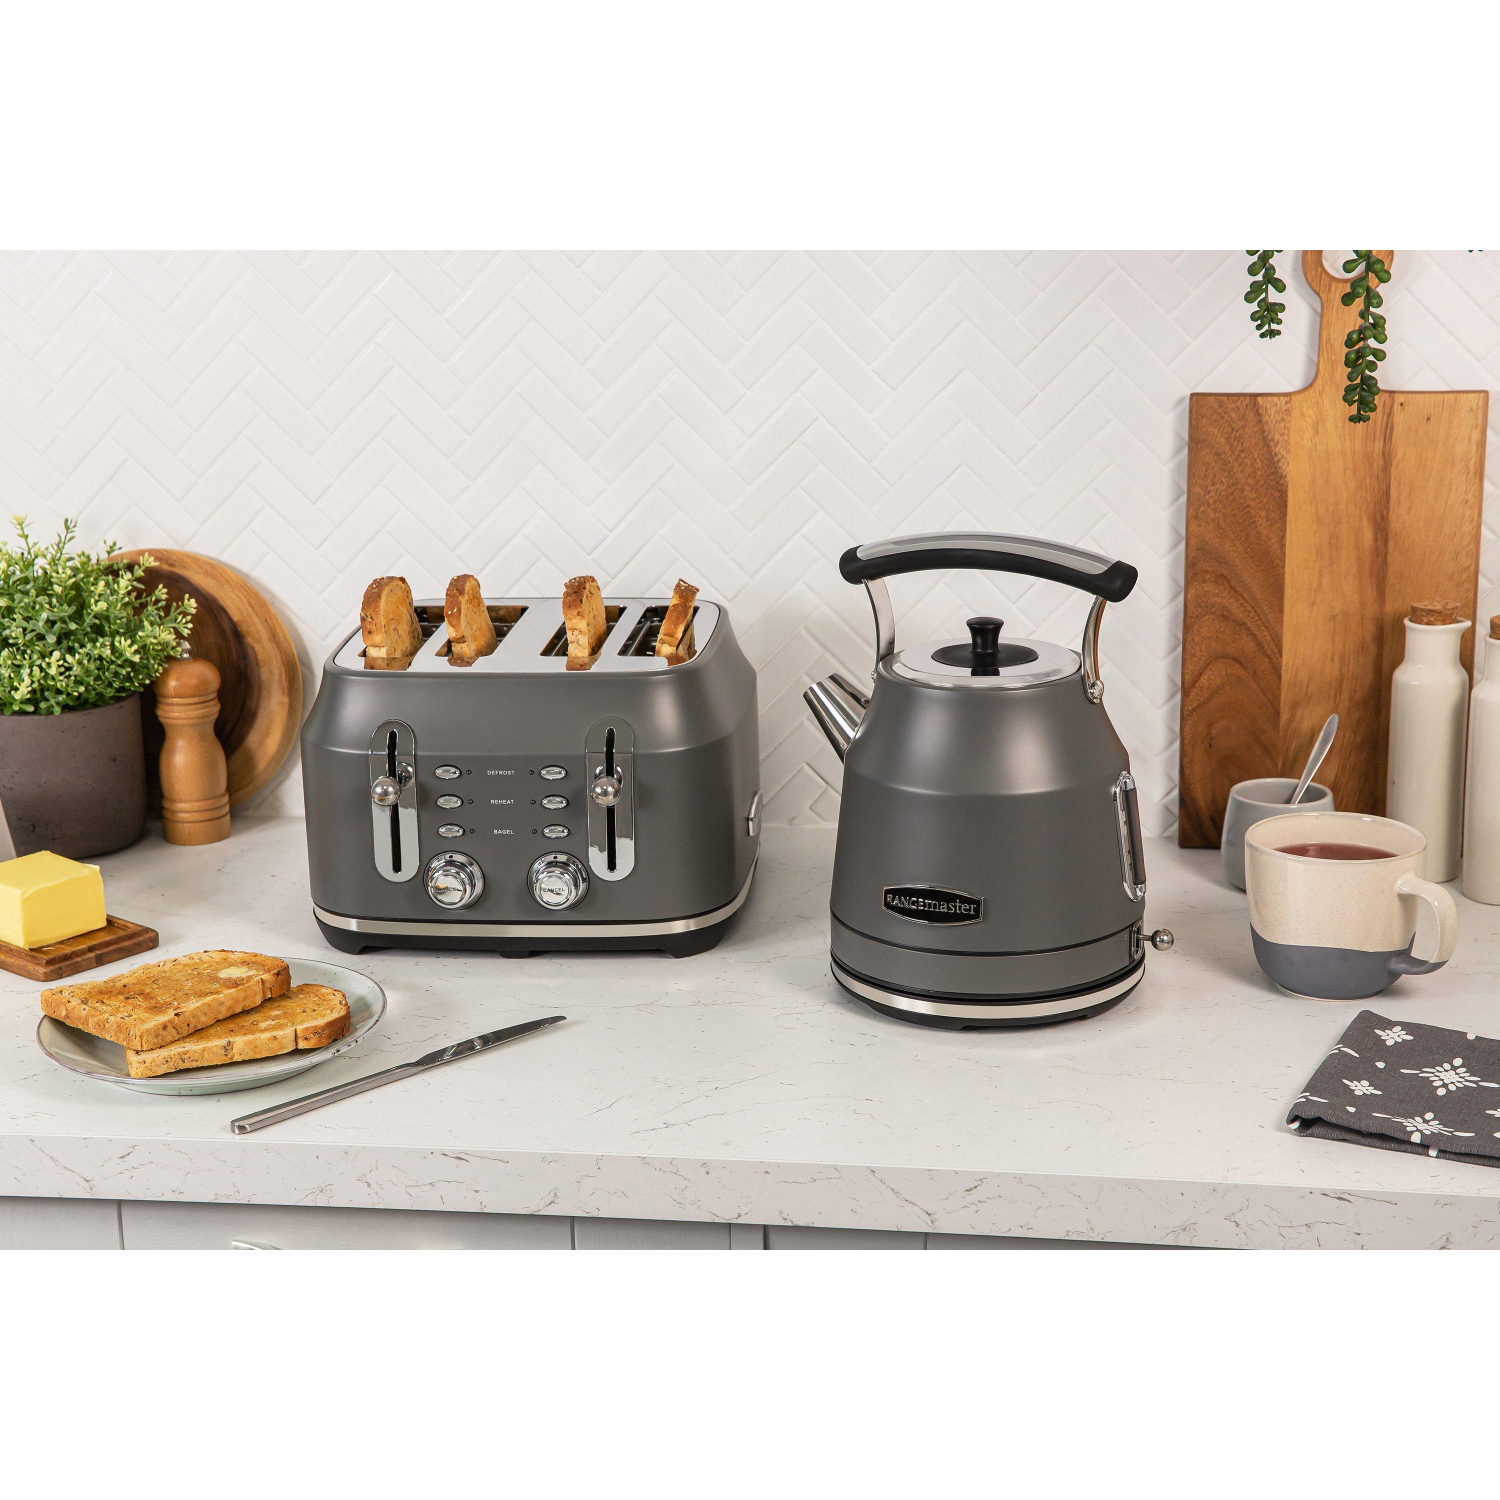 Rangemaster RMCL4S201GY 4 Slice Toaster - Matte Slate Grey - 1